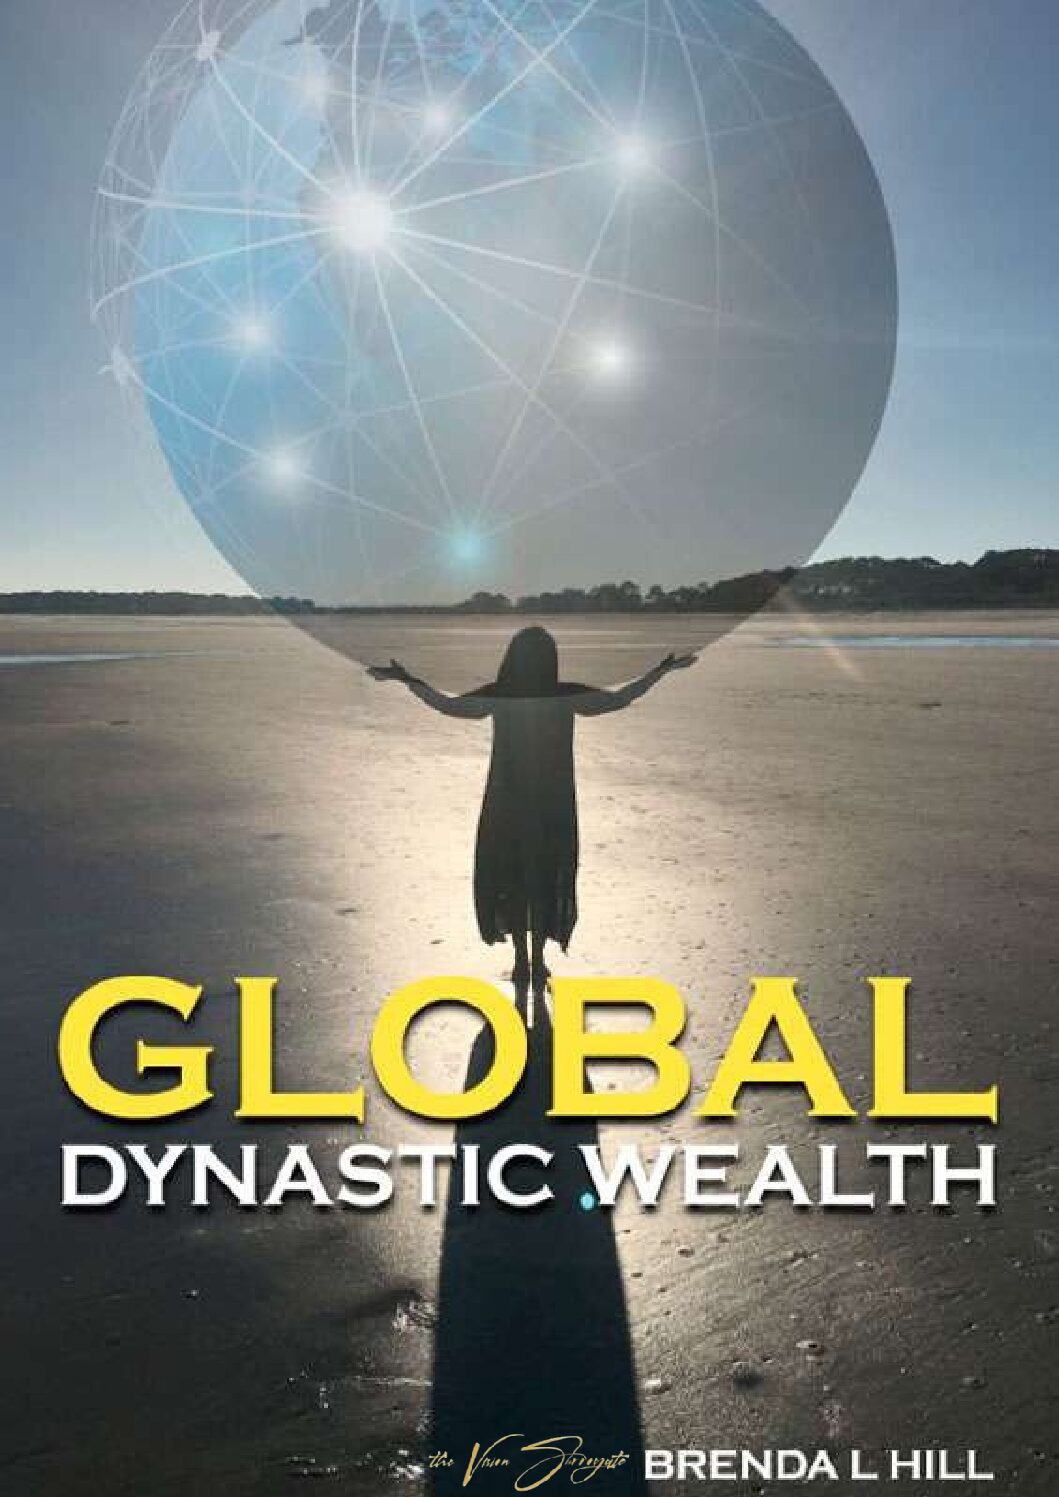 How to Build Dynastic Wealth (Book)